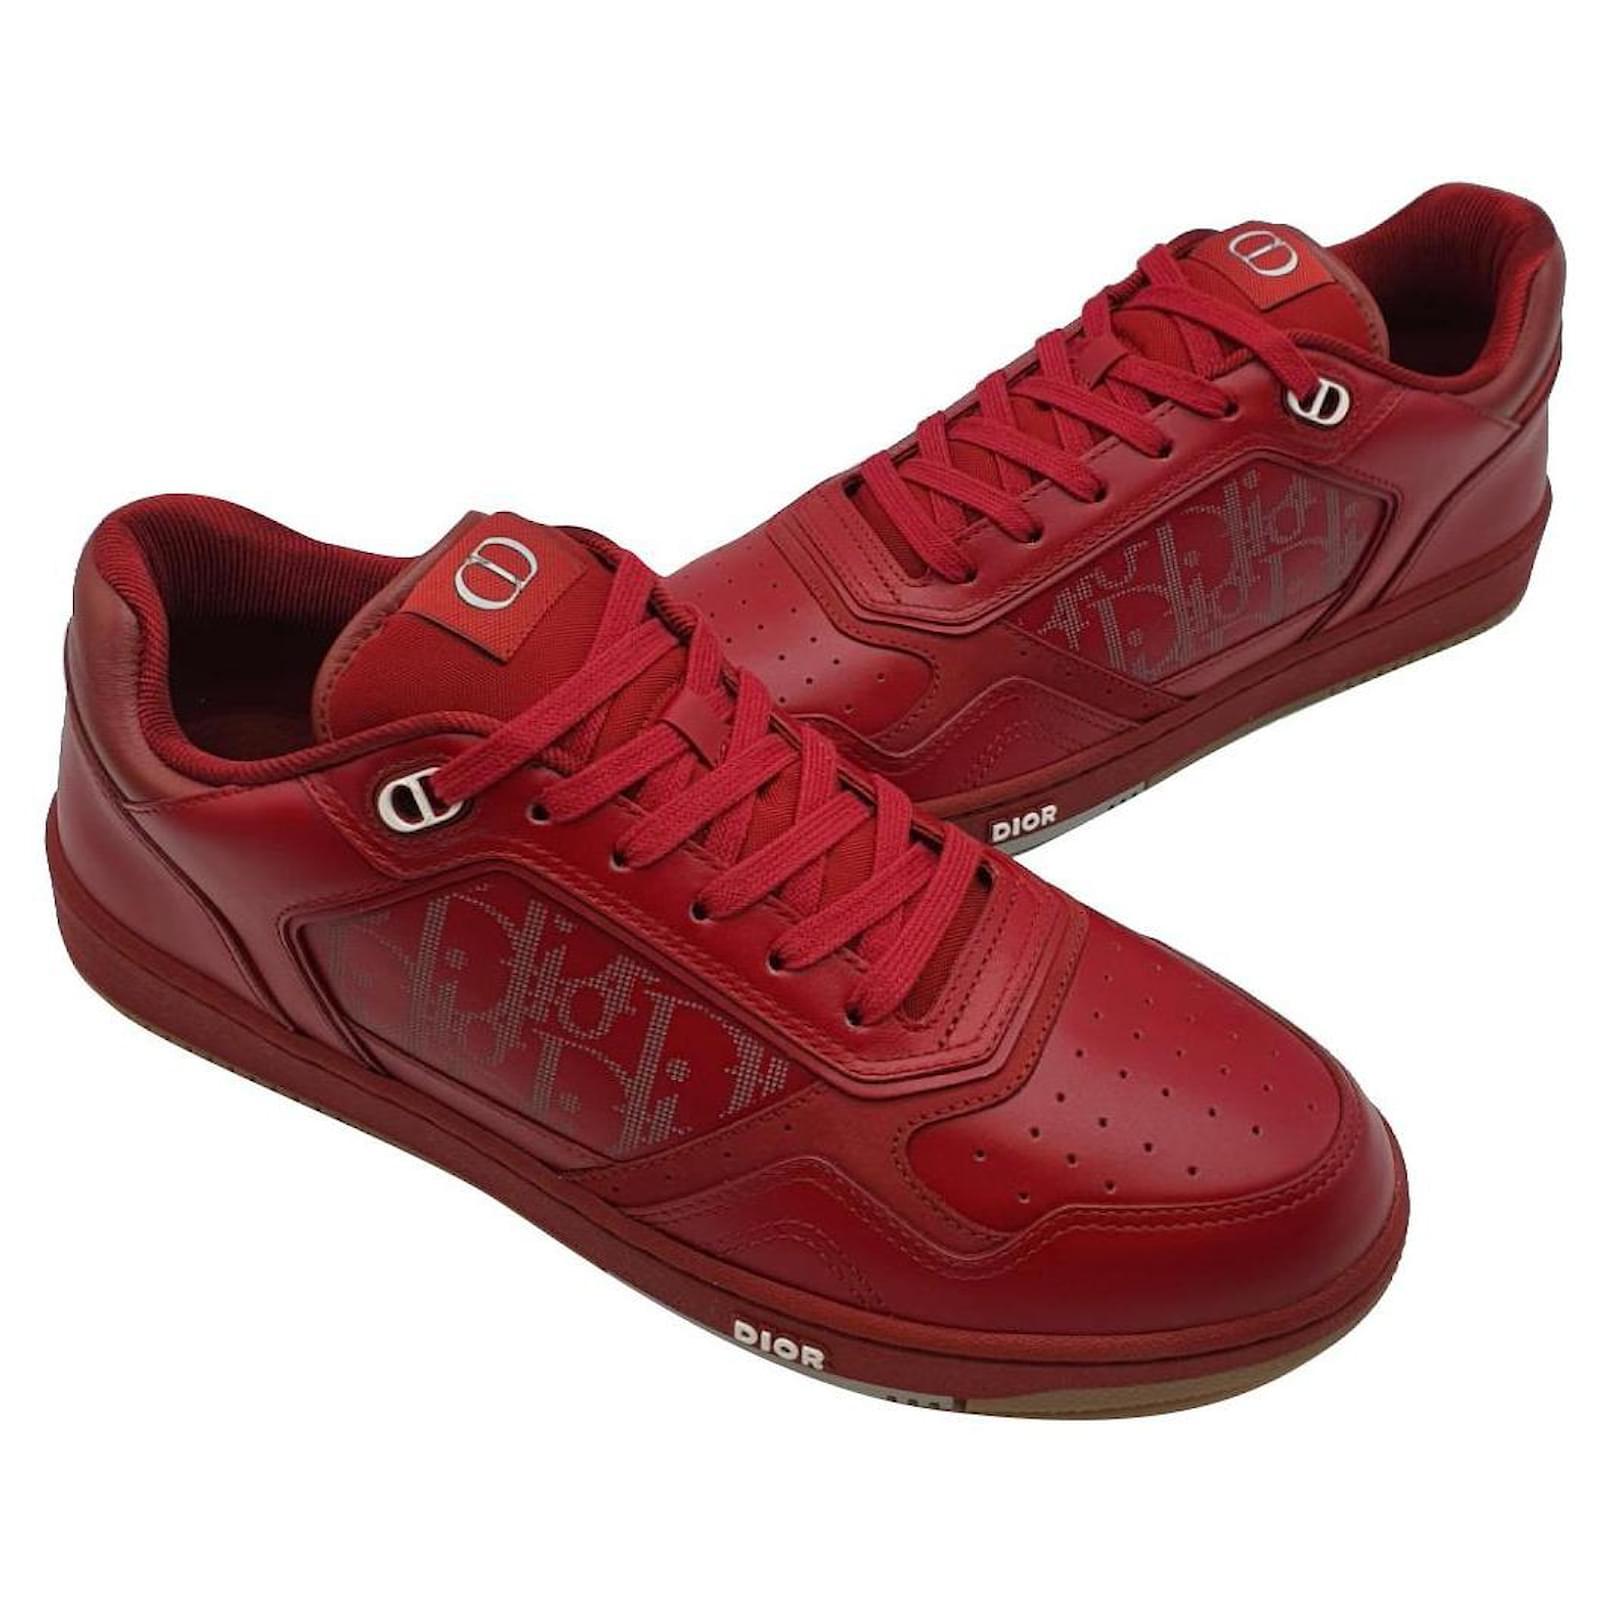 Christian Dior B23 High Top Sneaker Red Oblique Size 44  US 11  eBay